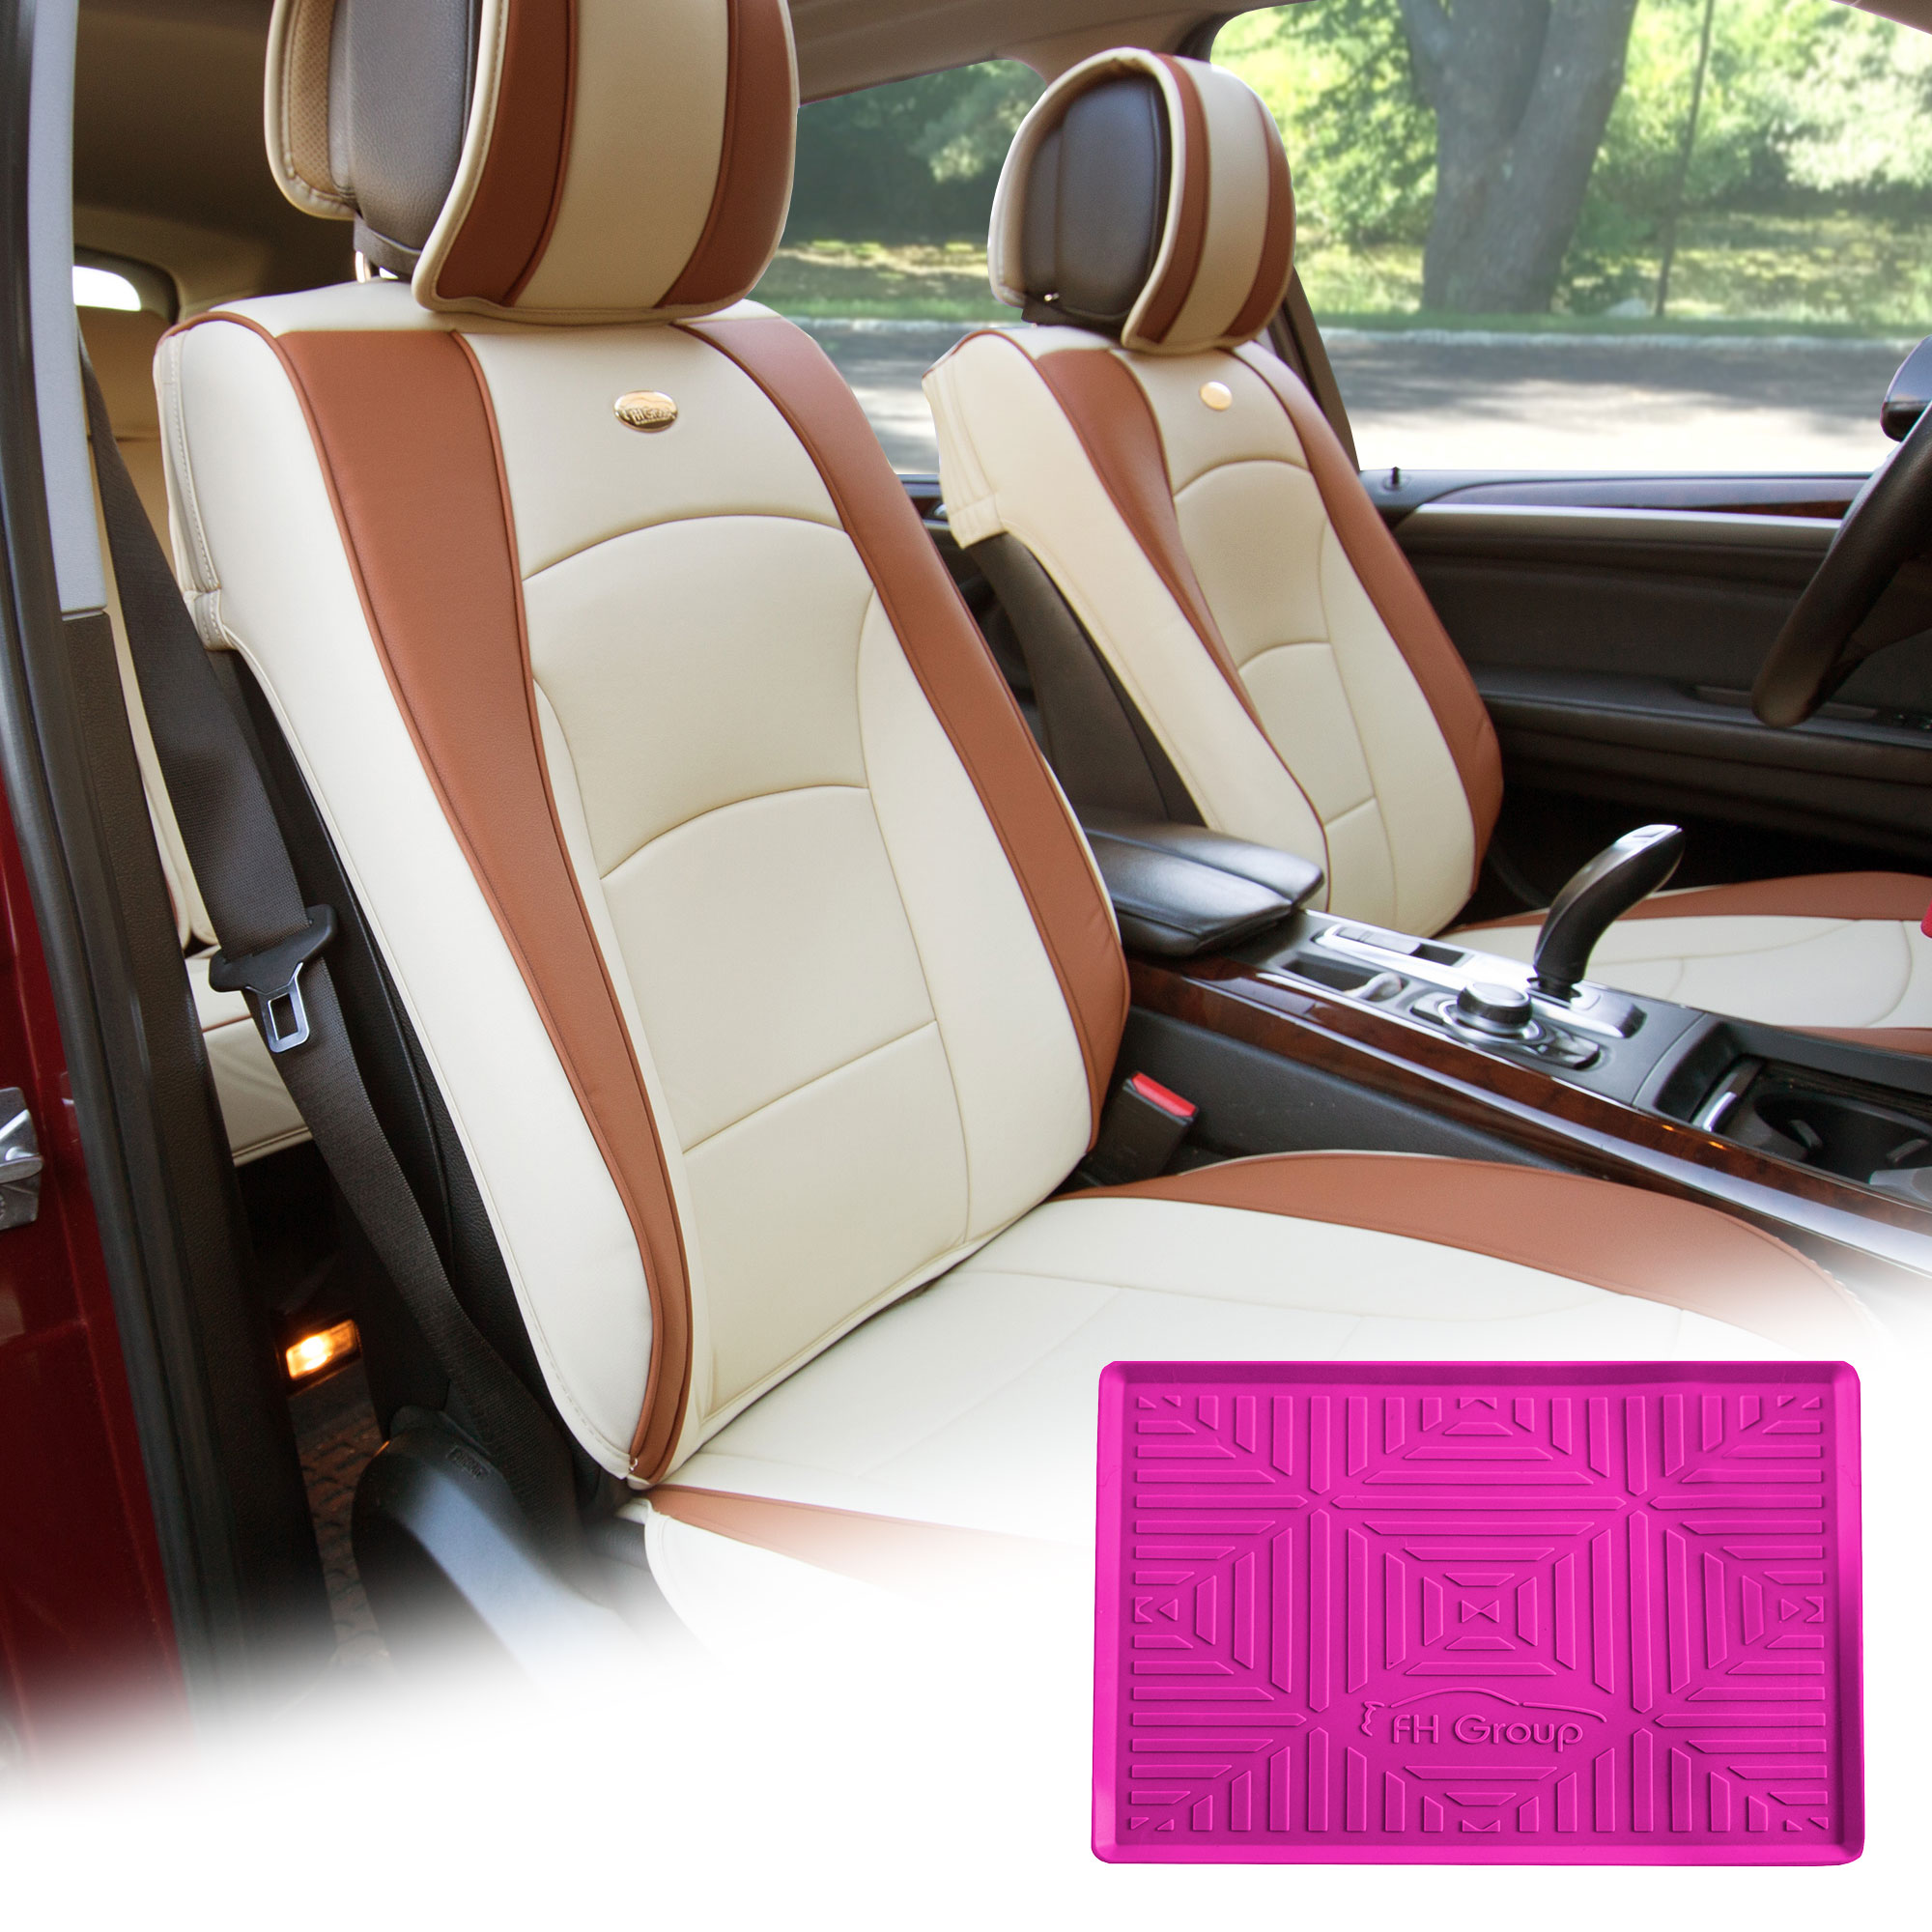 FH Group Beige Leatherette Front Bucket Seat Cushion Covers for Auto Car SUV Truck Van with Hot Pink Dash Mat Combo